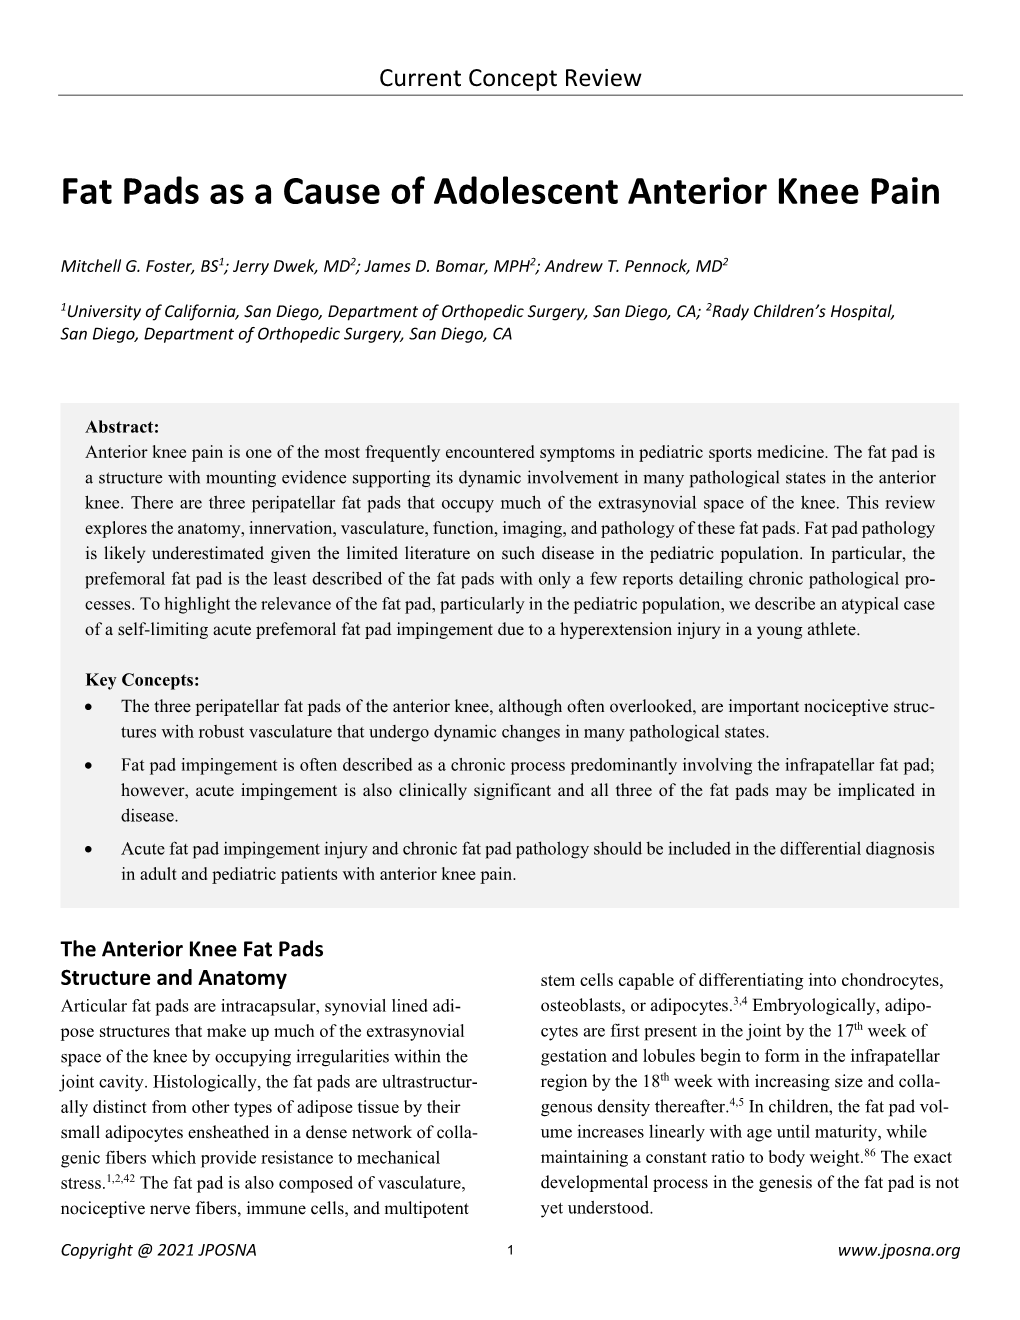 Fat Pads As a Cause of Adolescent Anterior Knee Pain